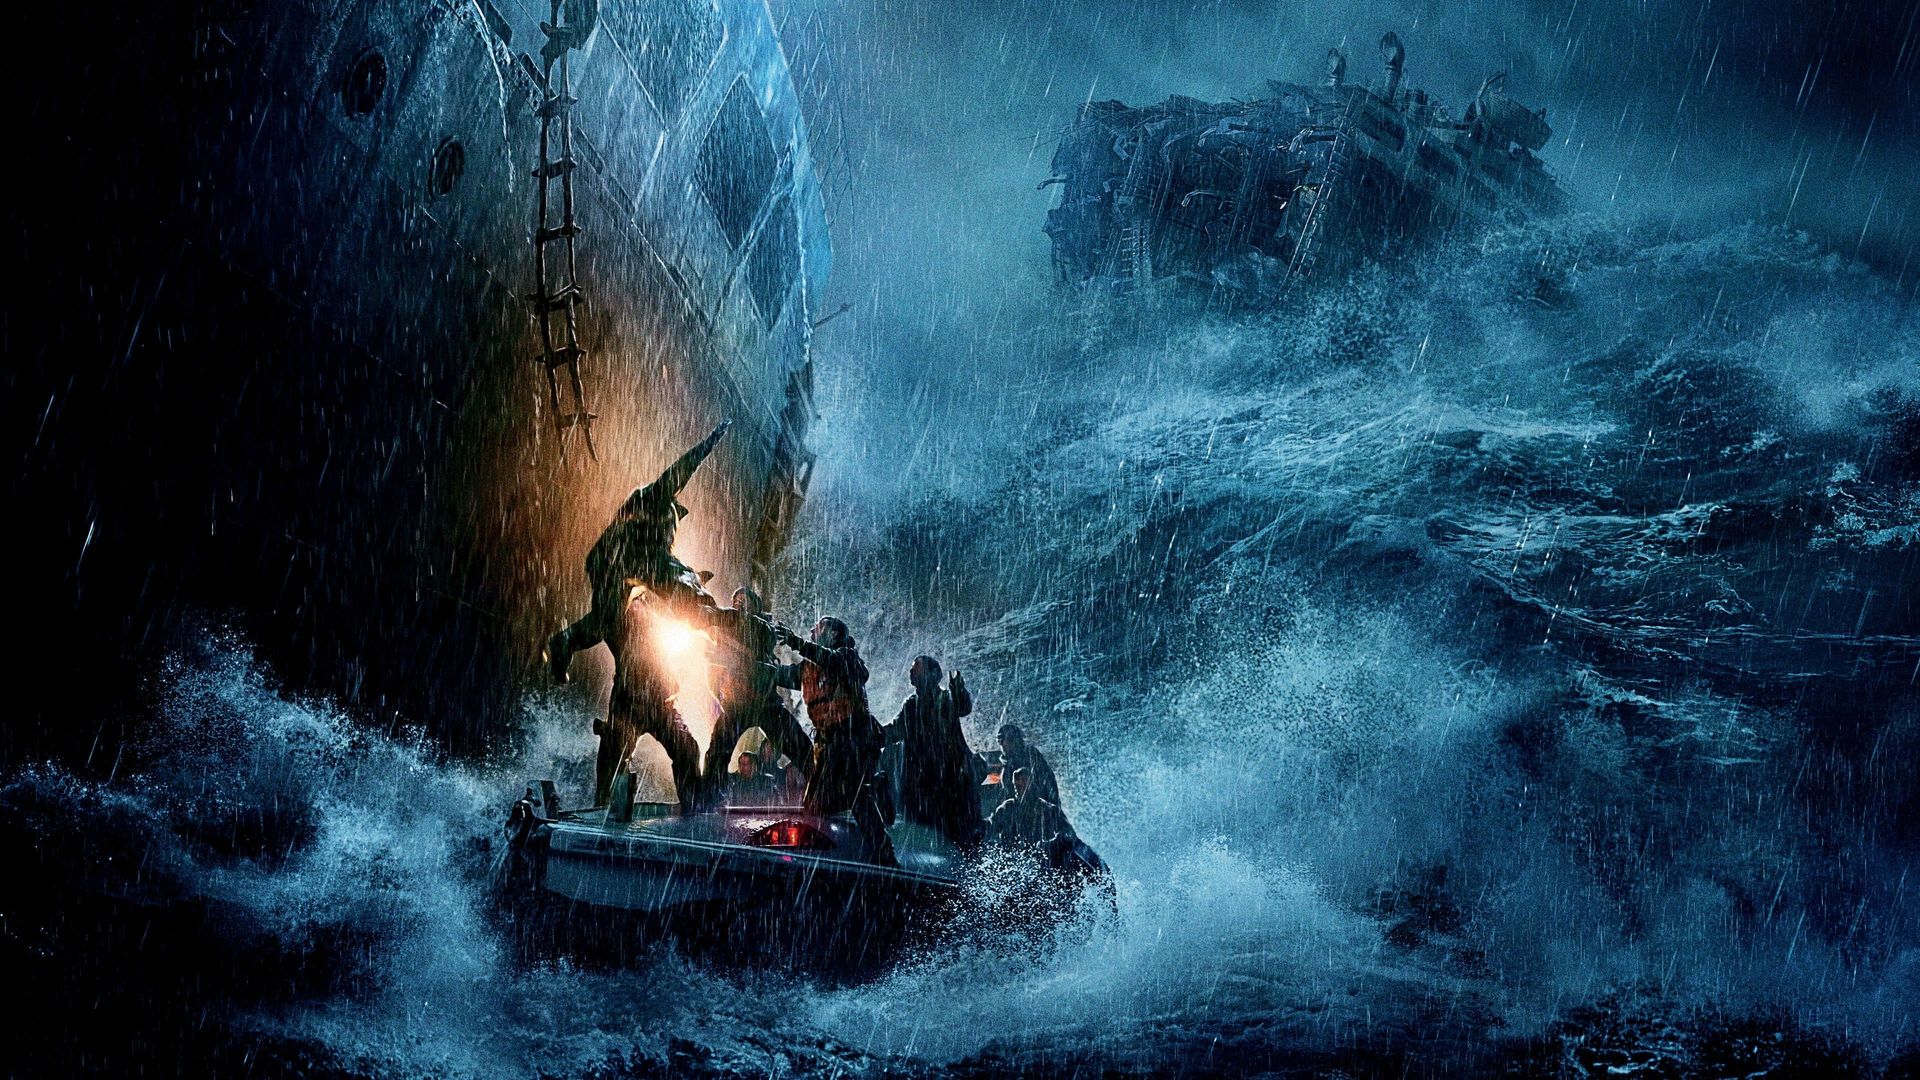 The Finest Hours Backdrop